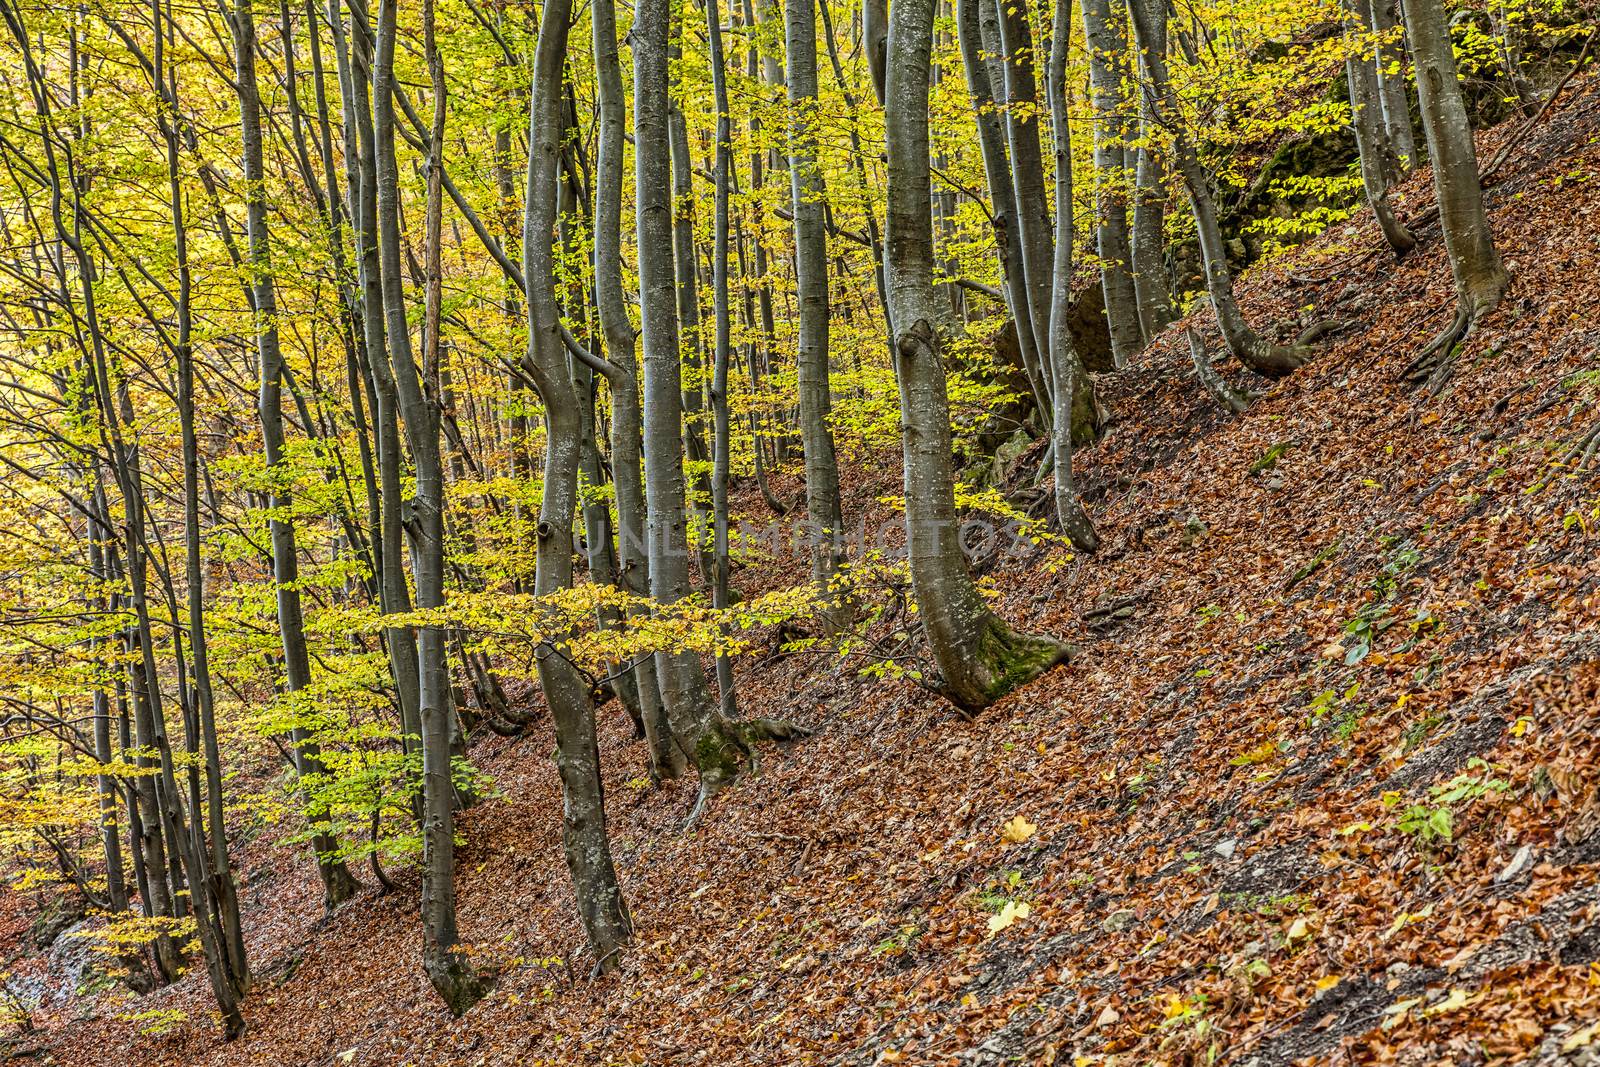 Detail of a leafbearing forest of on a slope during autumn.